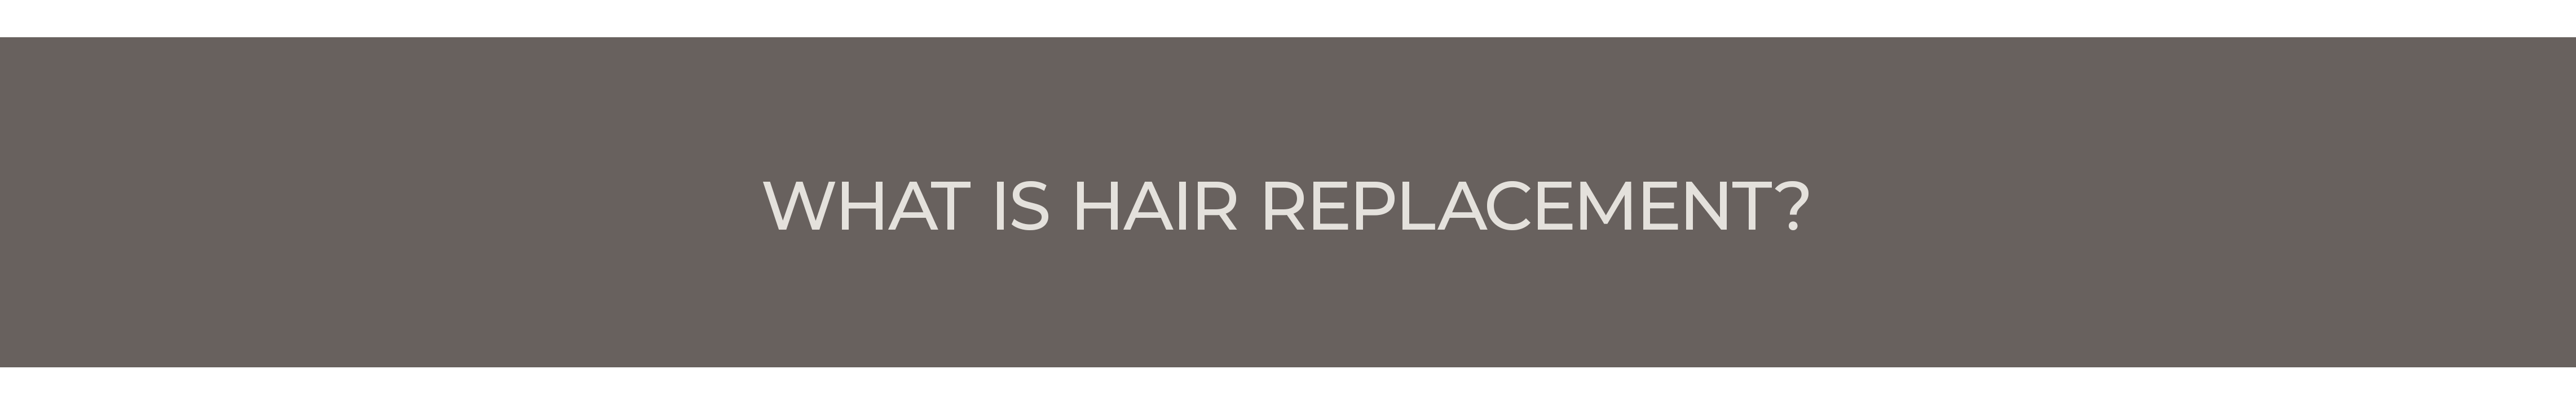 What is hair replacement?